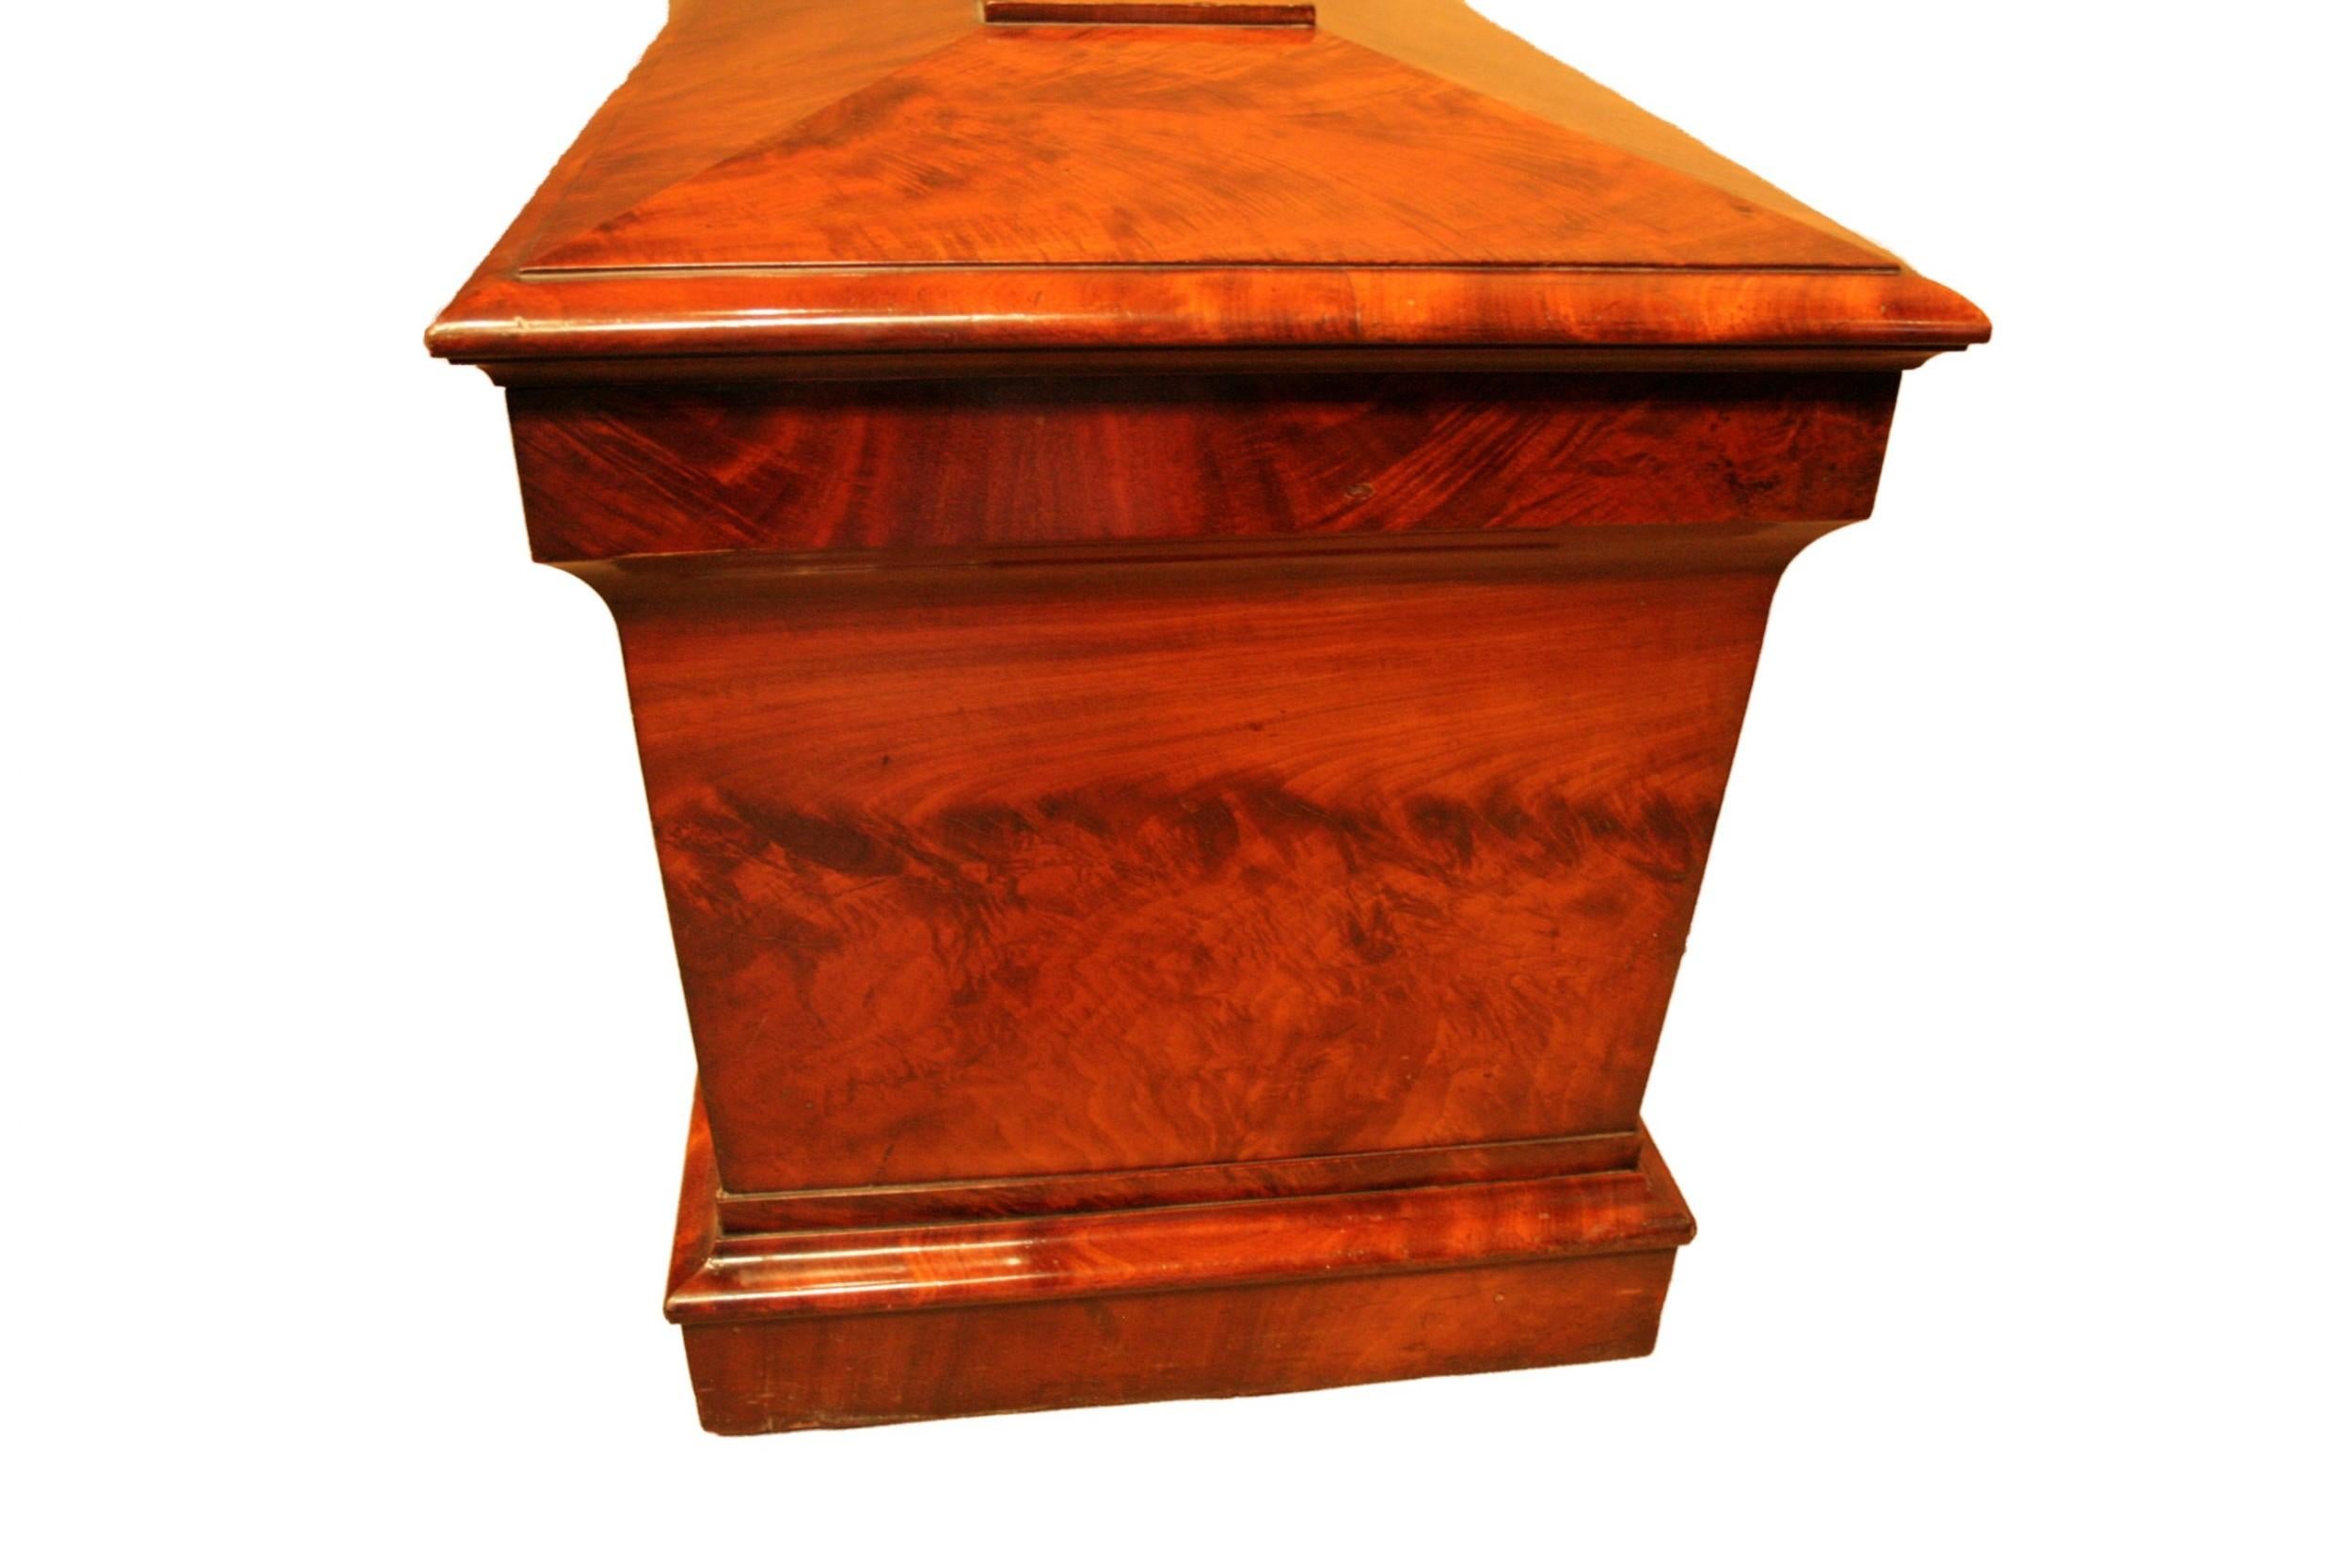 English Early 19th Century George III Flame Mahogany Sarcophagus Wine Cooler For Sale 3